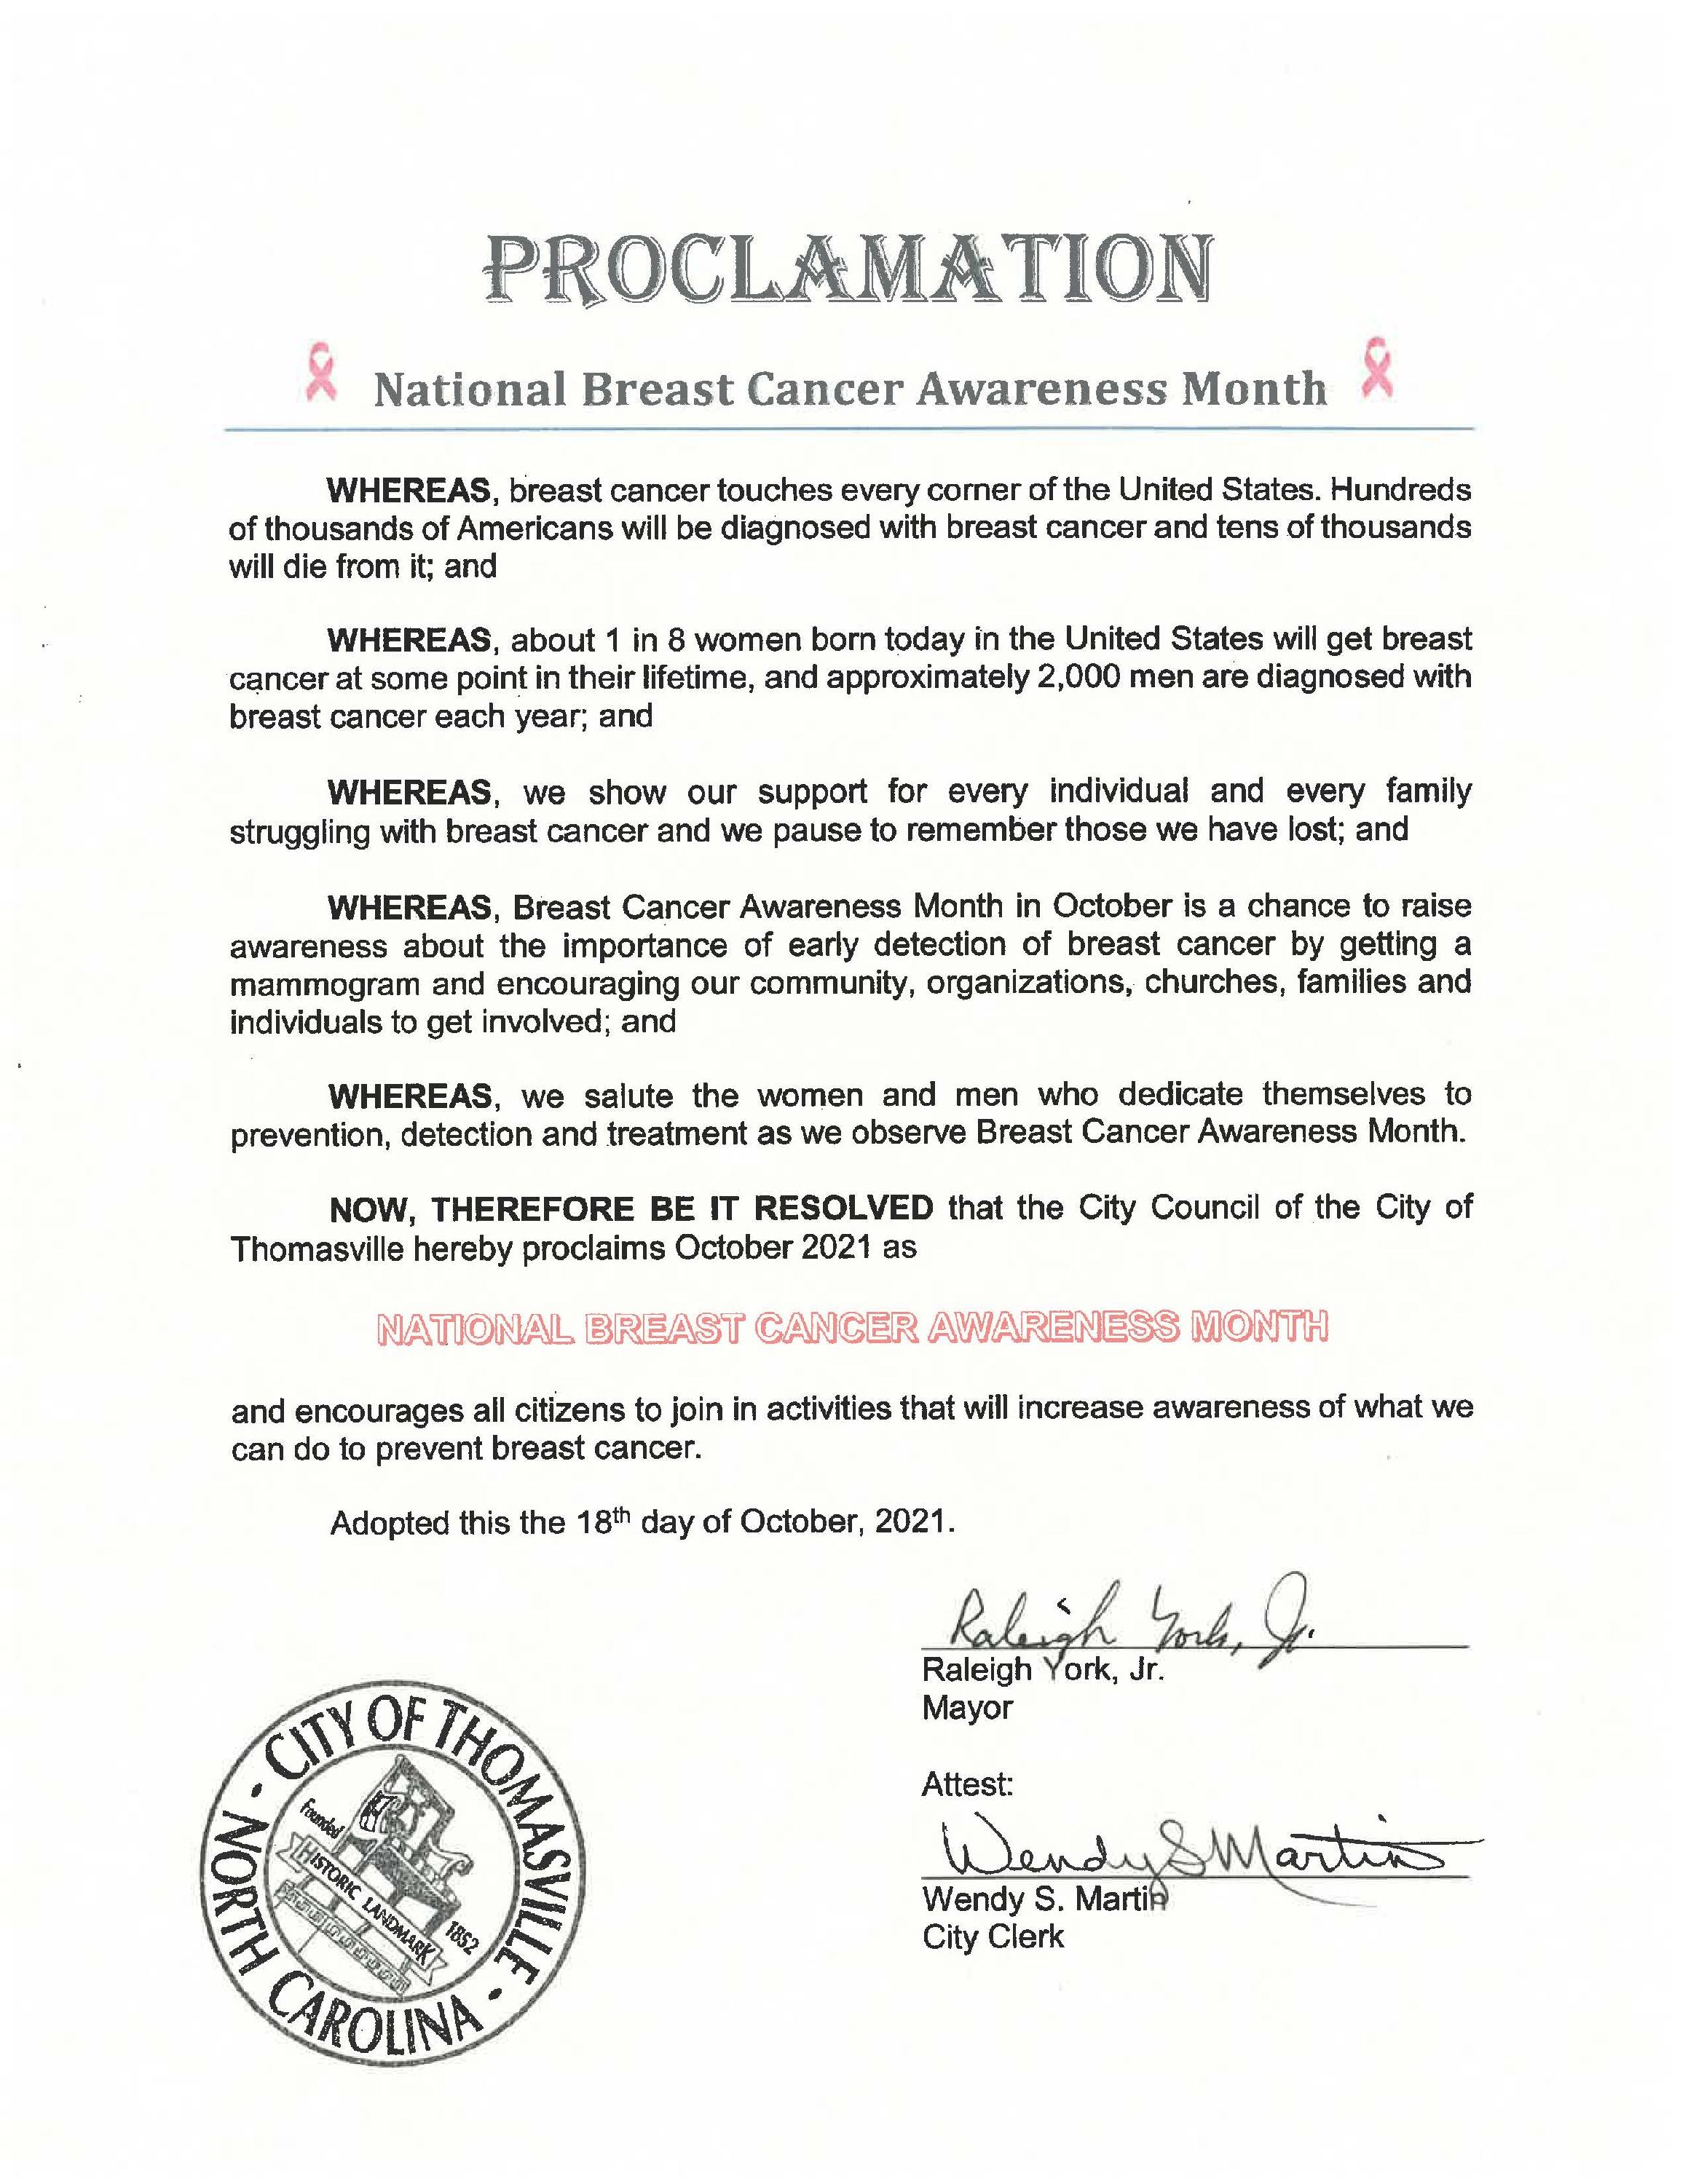 Proclamation - National Breast Cancer Awareness Month 2021